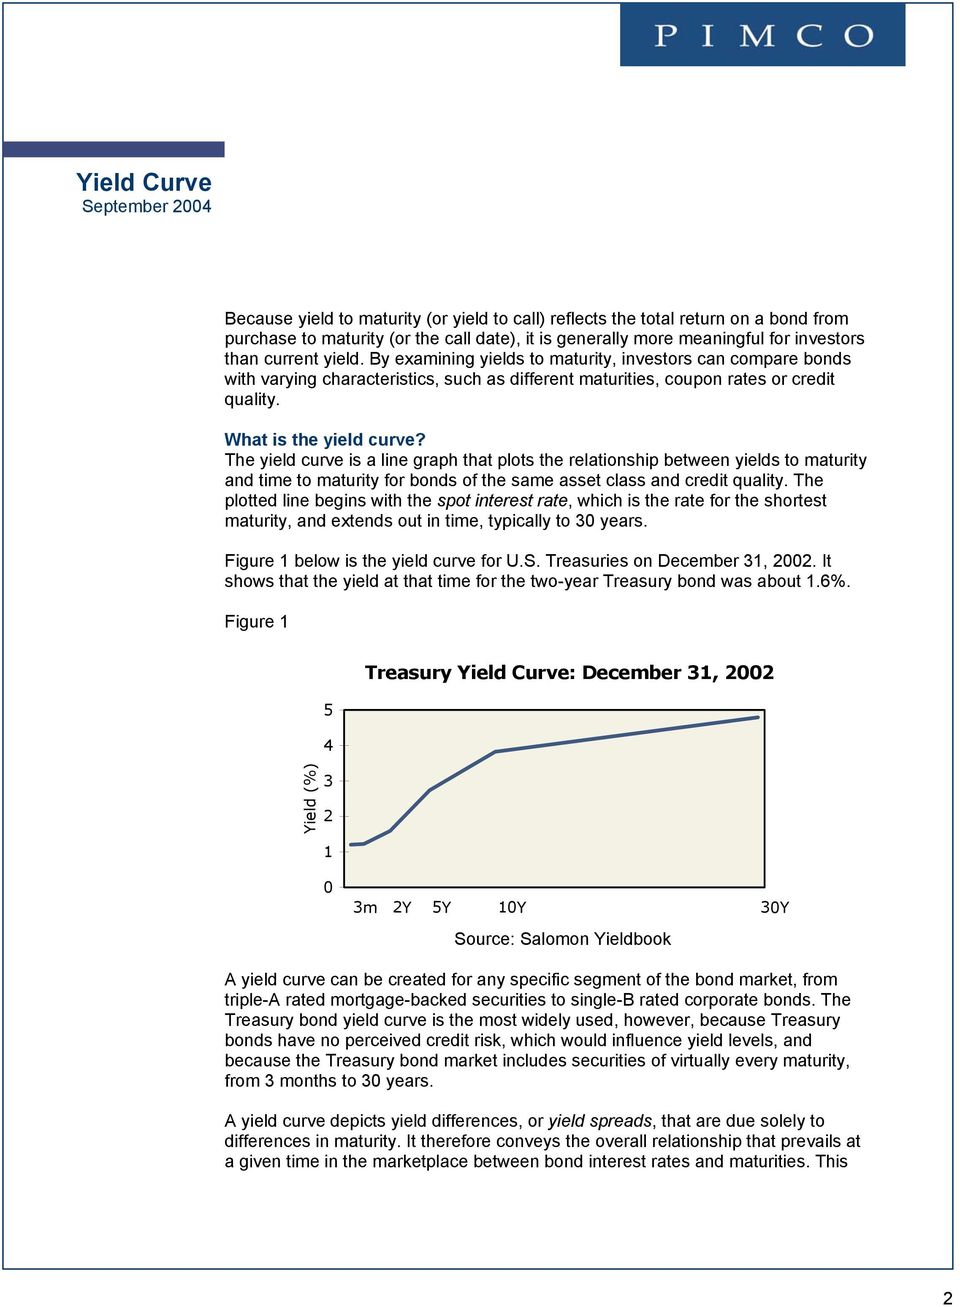 The yield curve is a line graph that plots the relationship between yields to maturity and time to maturity for bonds of the same asset class and credit quality.